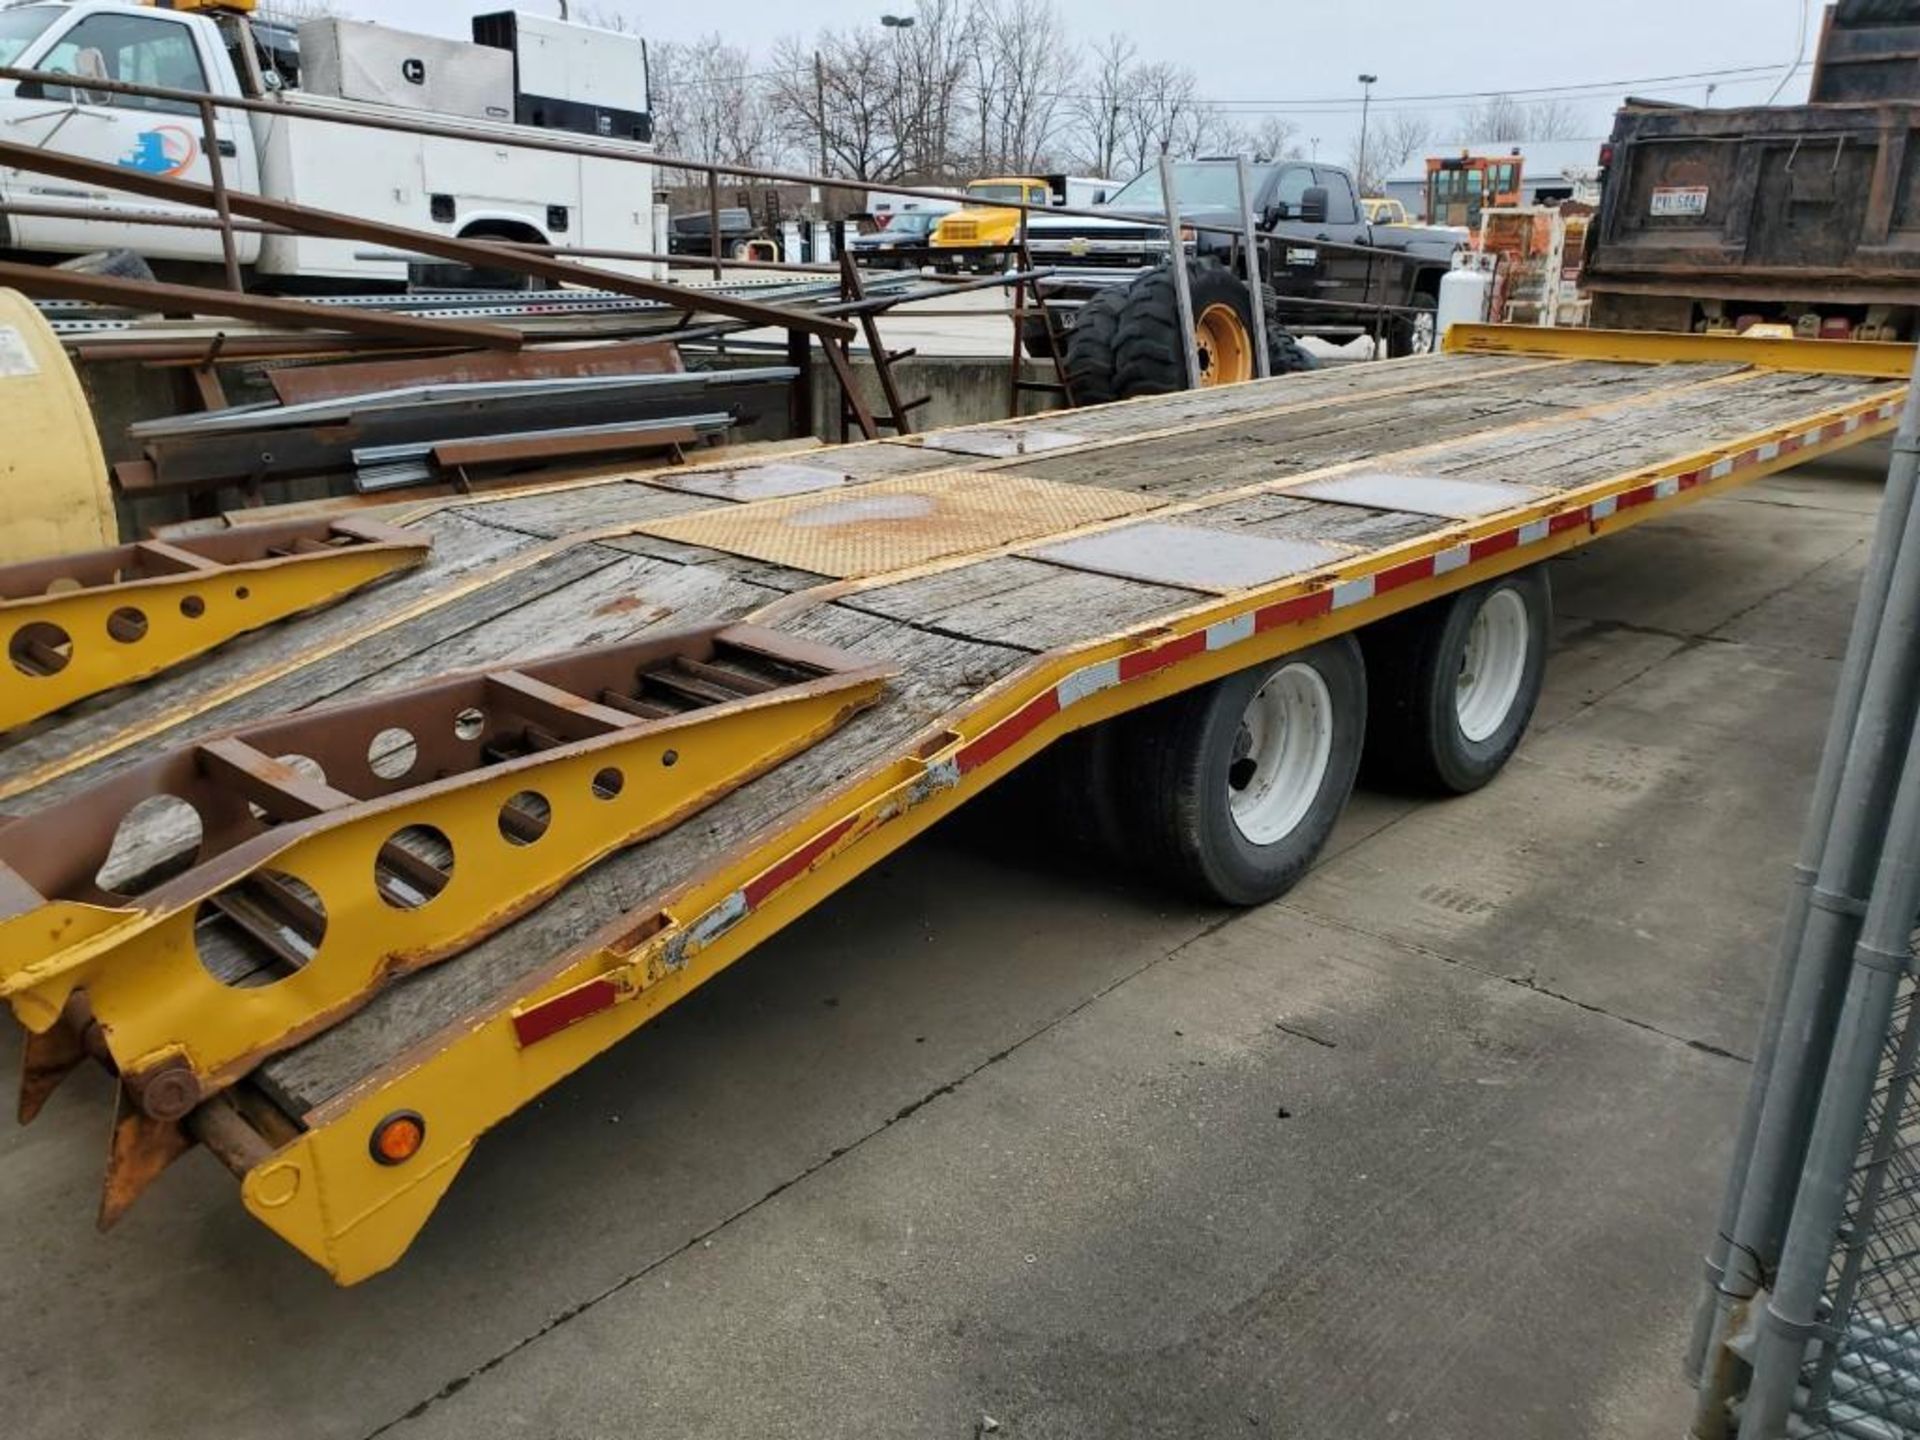 25' T/A DOVETAIL TRAILER, PINTLE HITCH, AIR BRAKES, WOOD DECK, STAKE BED, FOLD OVER STEEL RAMPS, DUA - Image 13 of 18